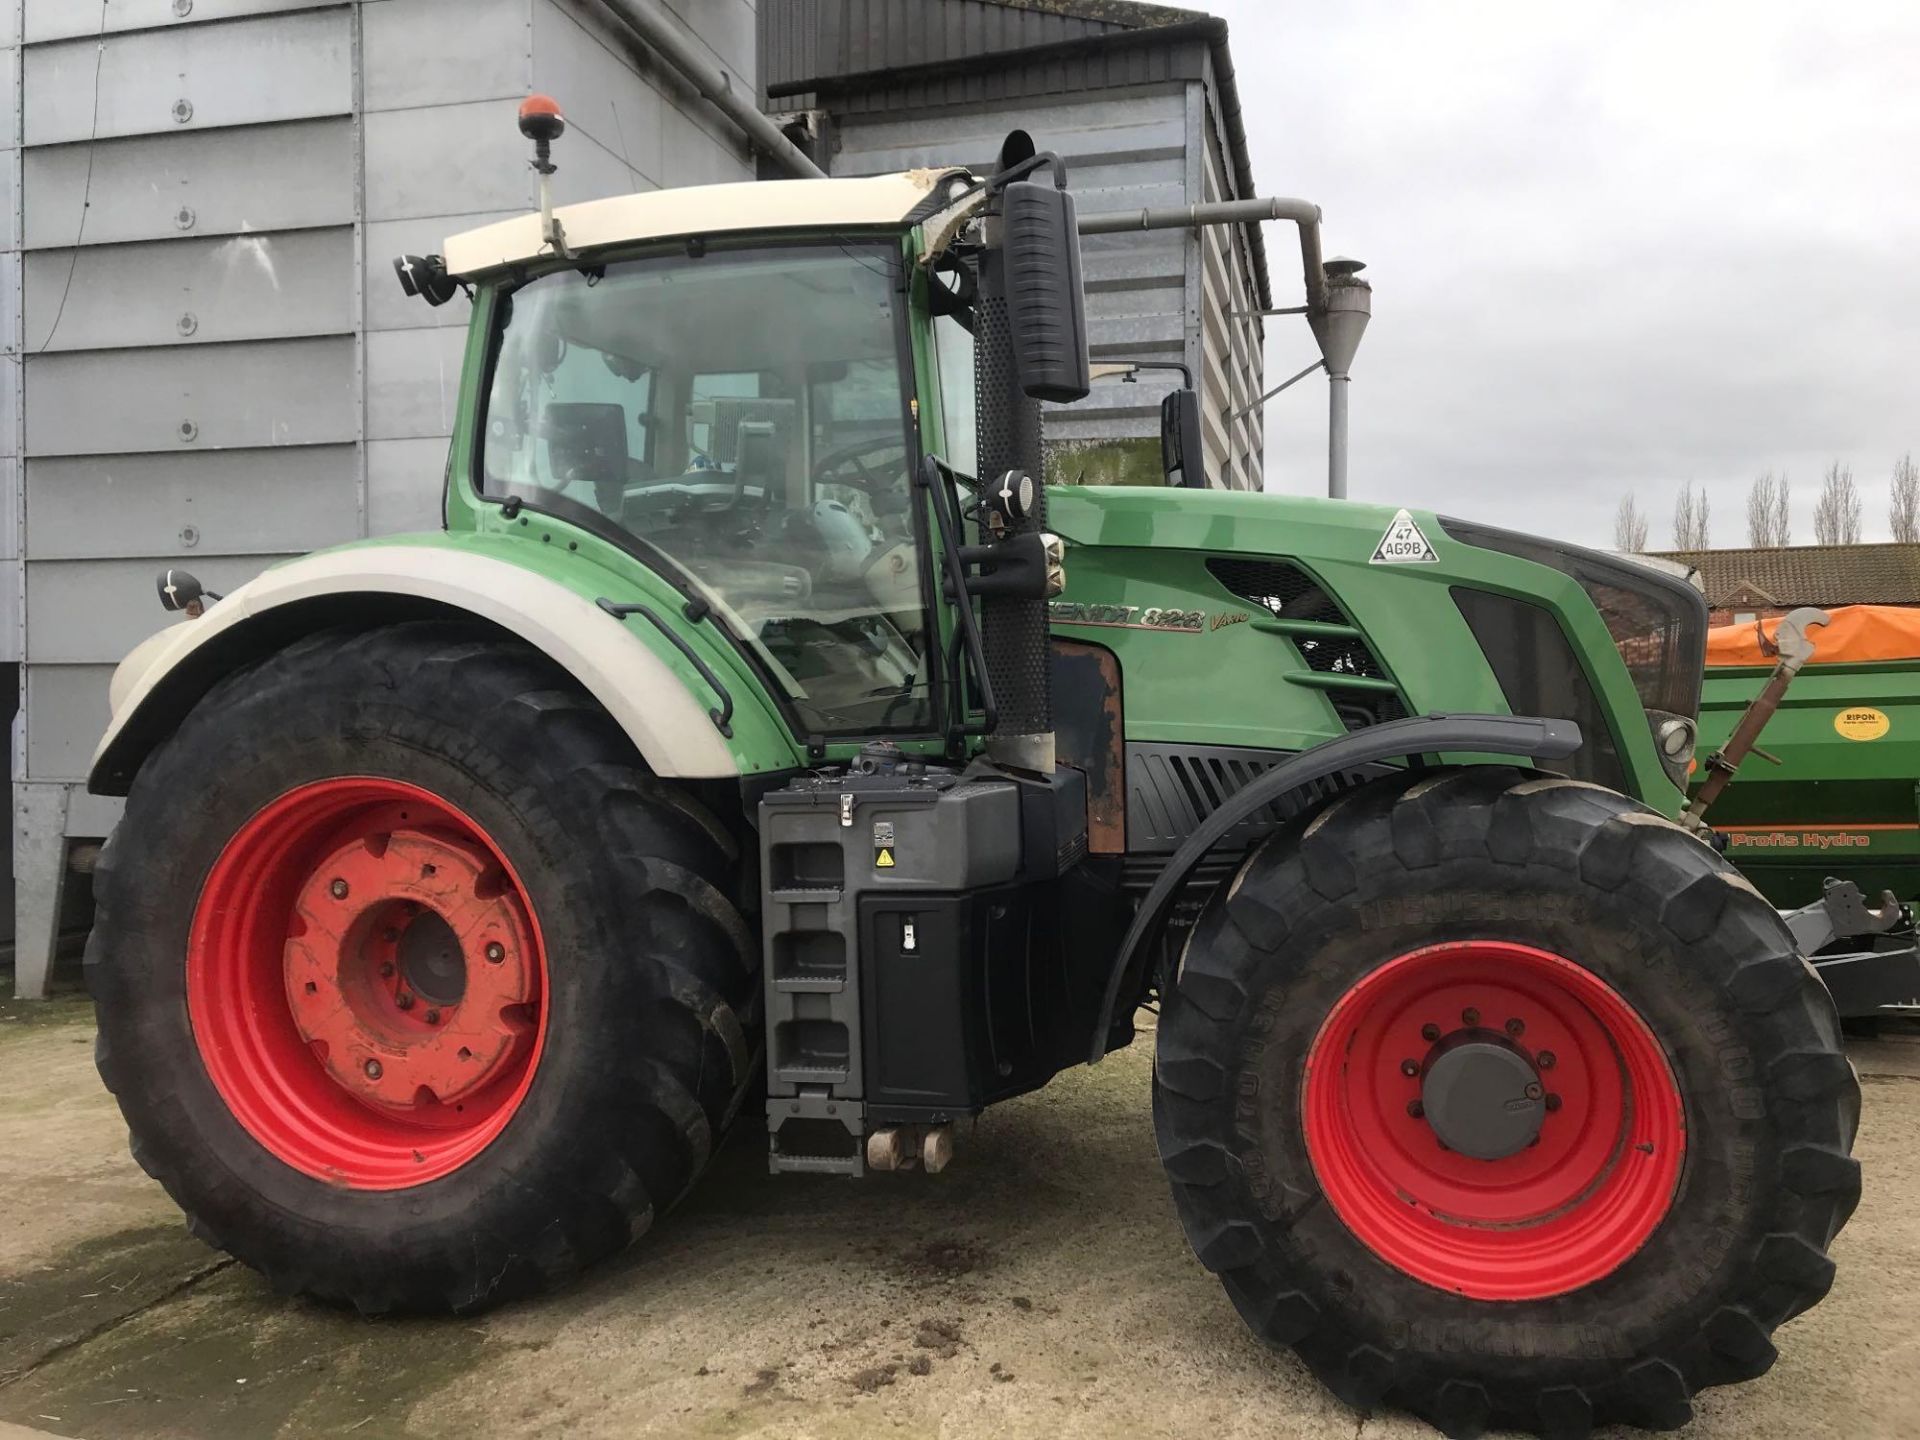 2013 Fendt 828 Vario tractor, 4wd, front linkage, front spool valves, 4No rear spool valves, Bill Be - Image 2 of 23